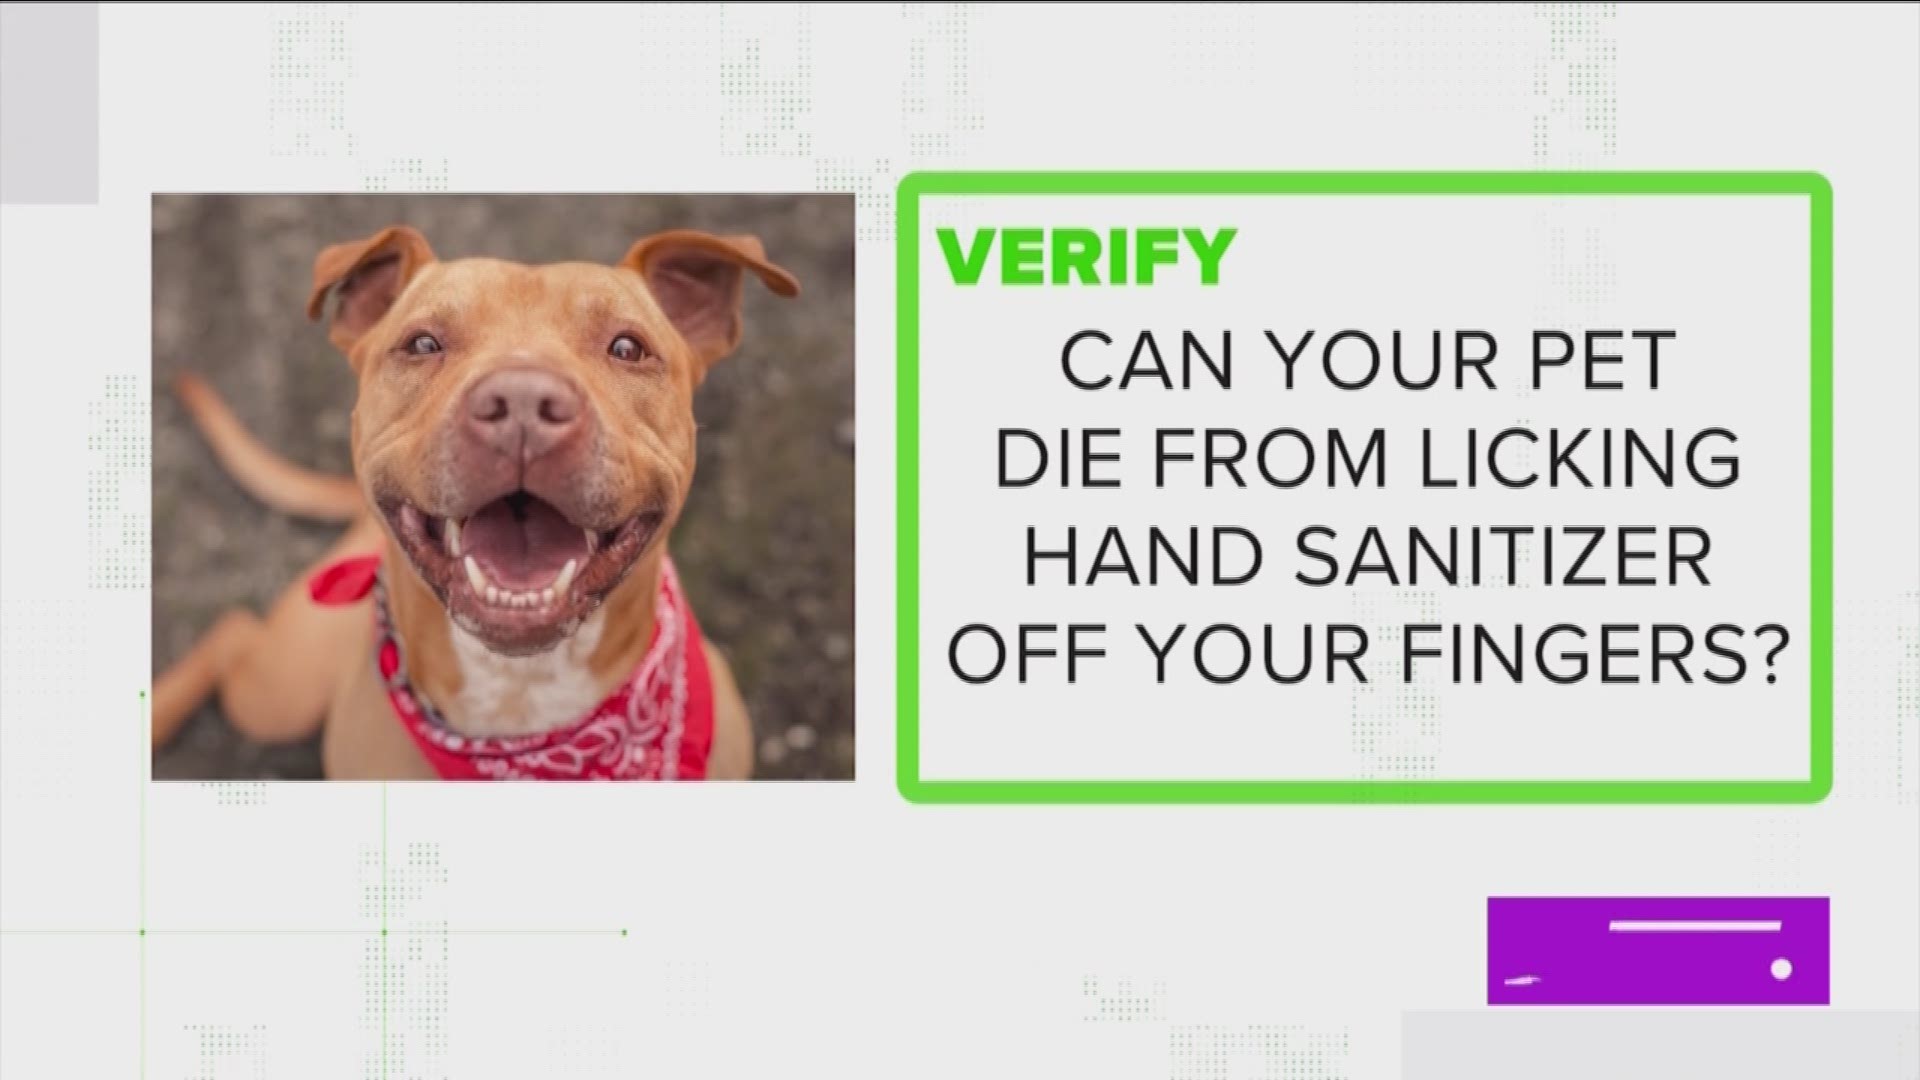 We verify is your pets can get sick from licking hand sanitizer off your hands